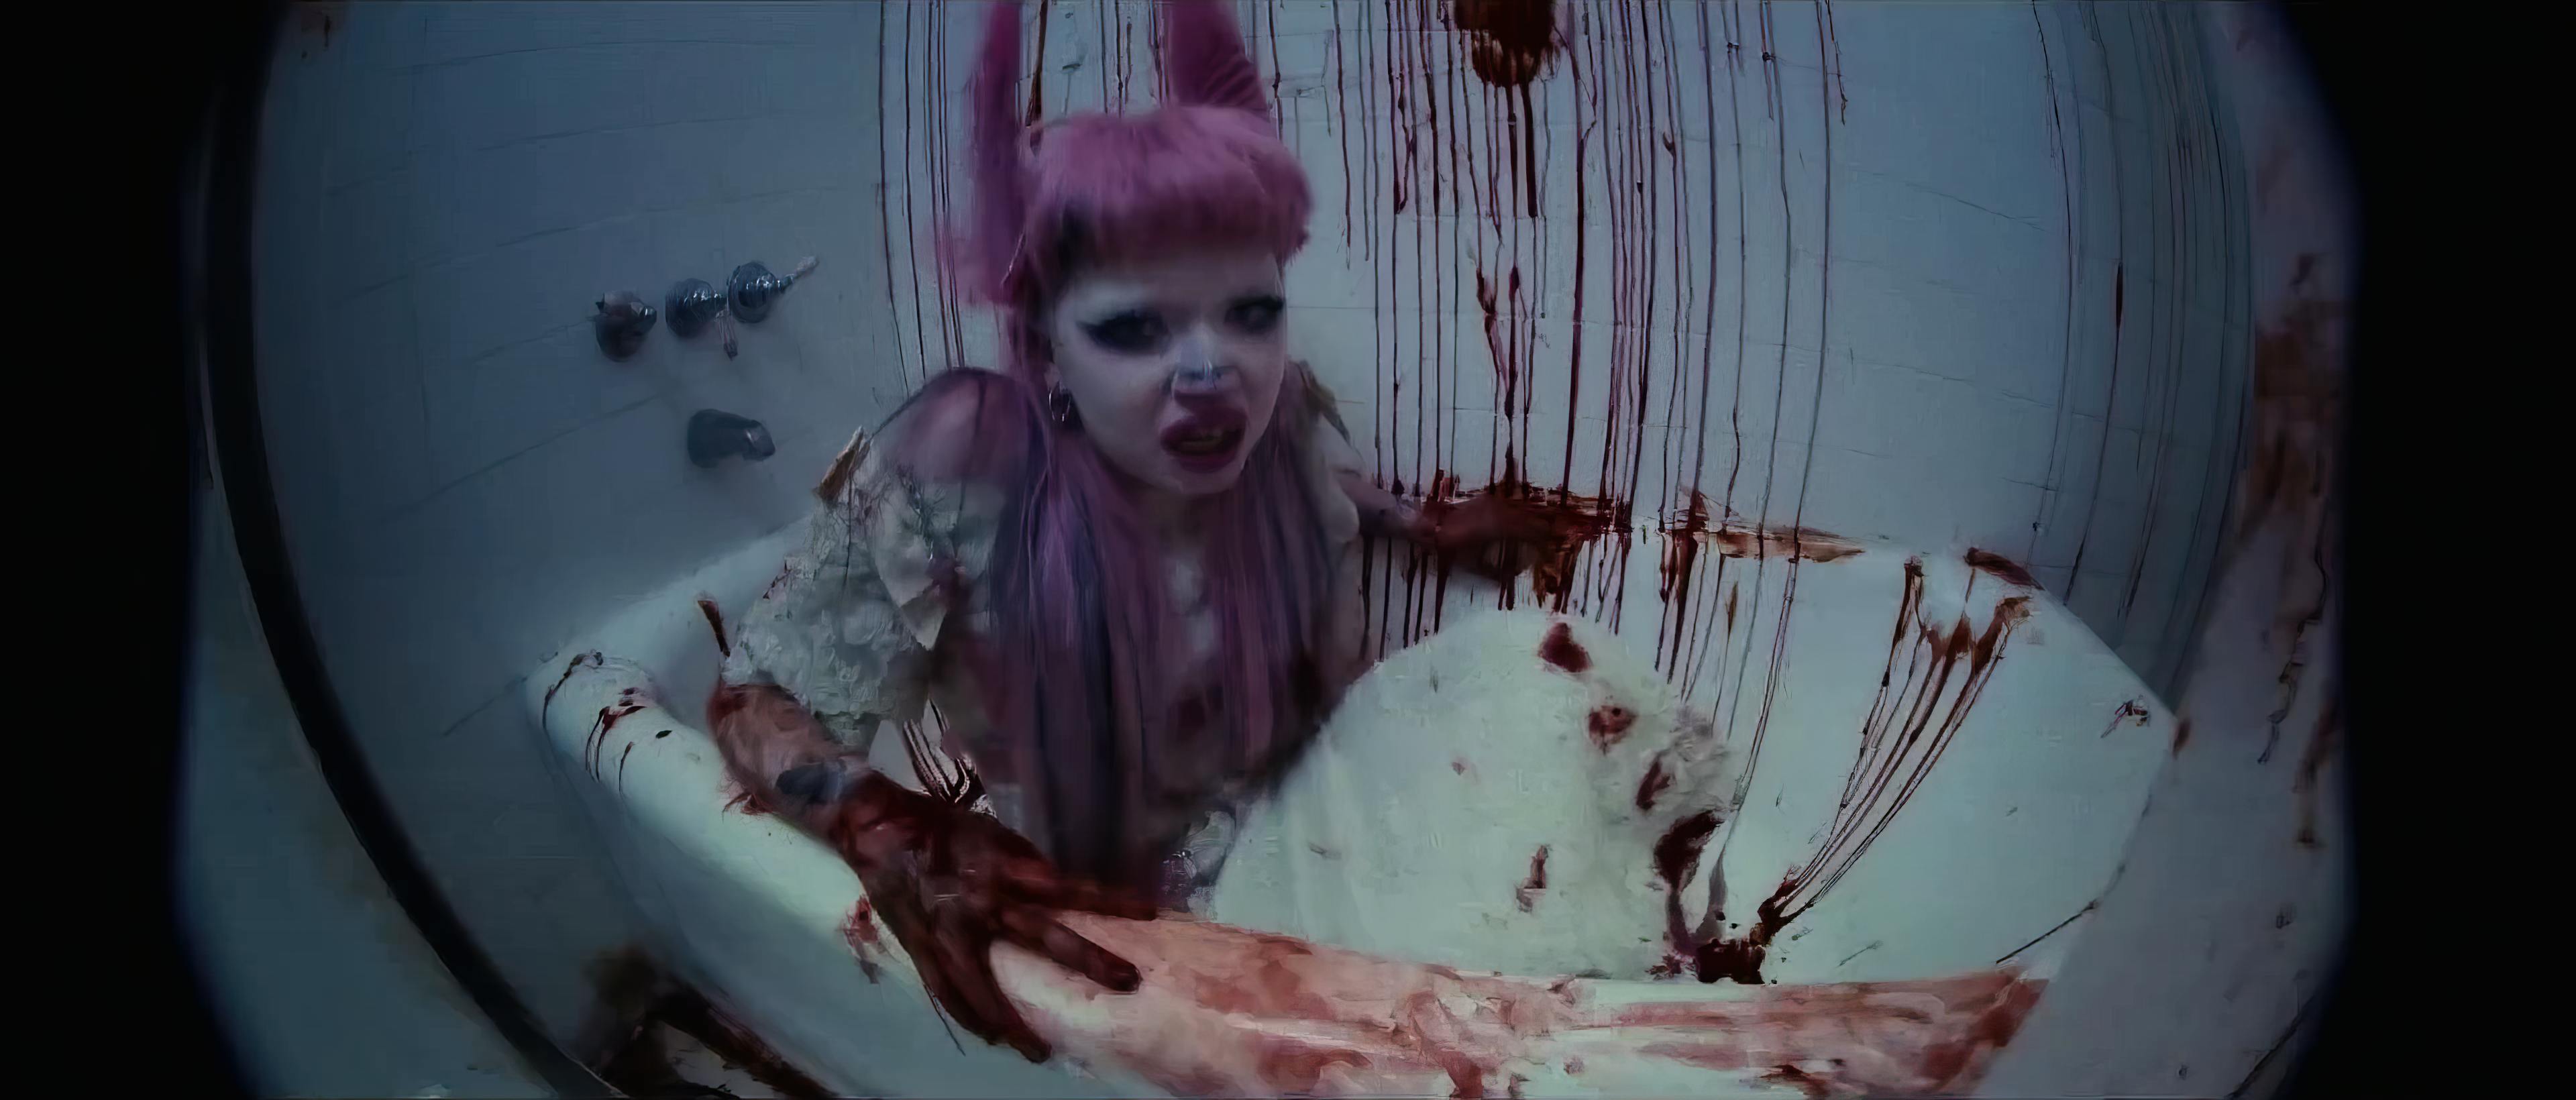 An artist in a bathtub, the scene styled with horror elements. They have vibrant purple hair, and their makeup and pose contribute to an intense and dramatic visual theme. The bathtub and surrounding tiles are smeared with what appears to be blood, enhancing the eerie, cinematic quality of the image.